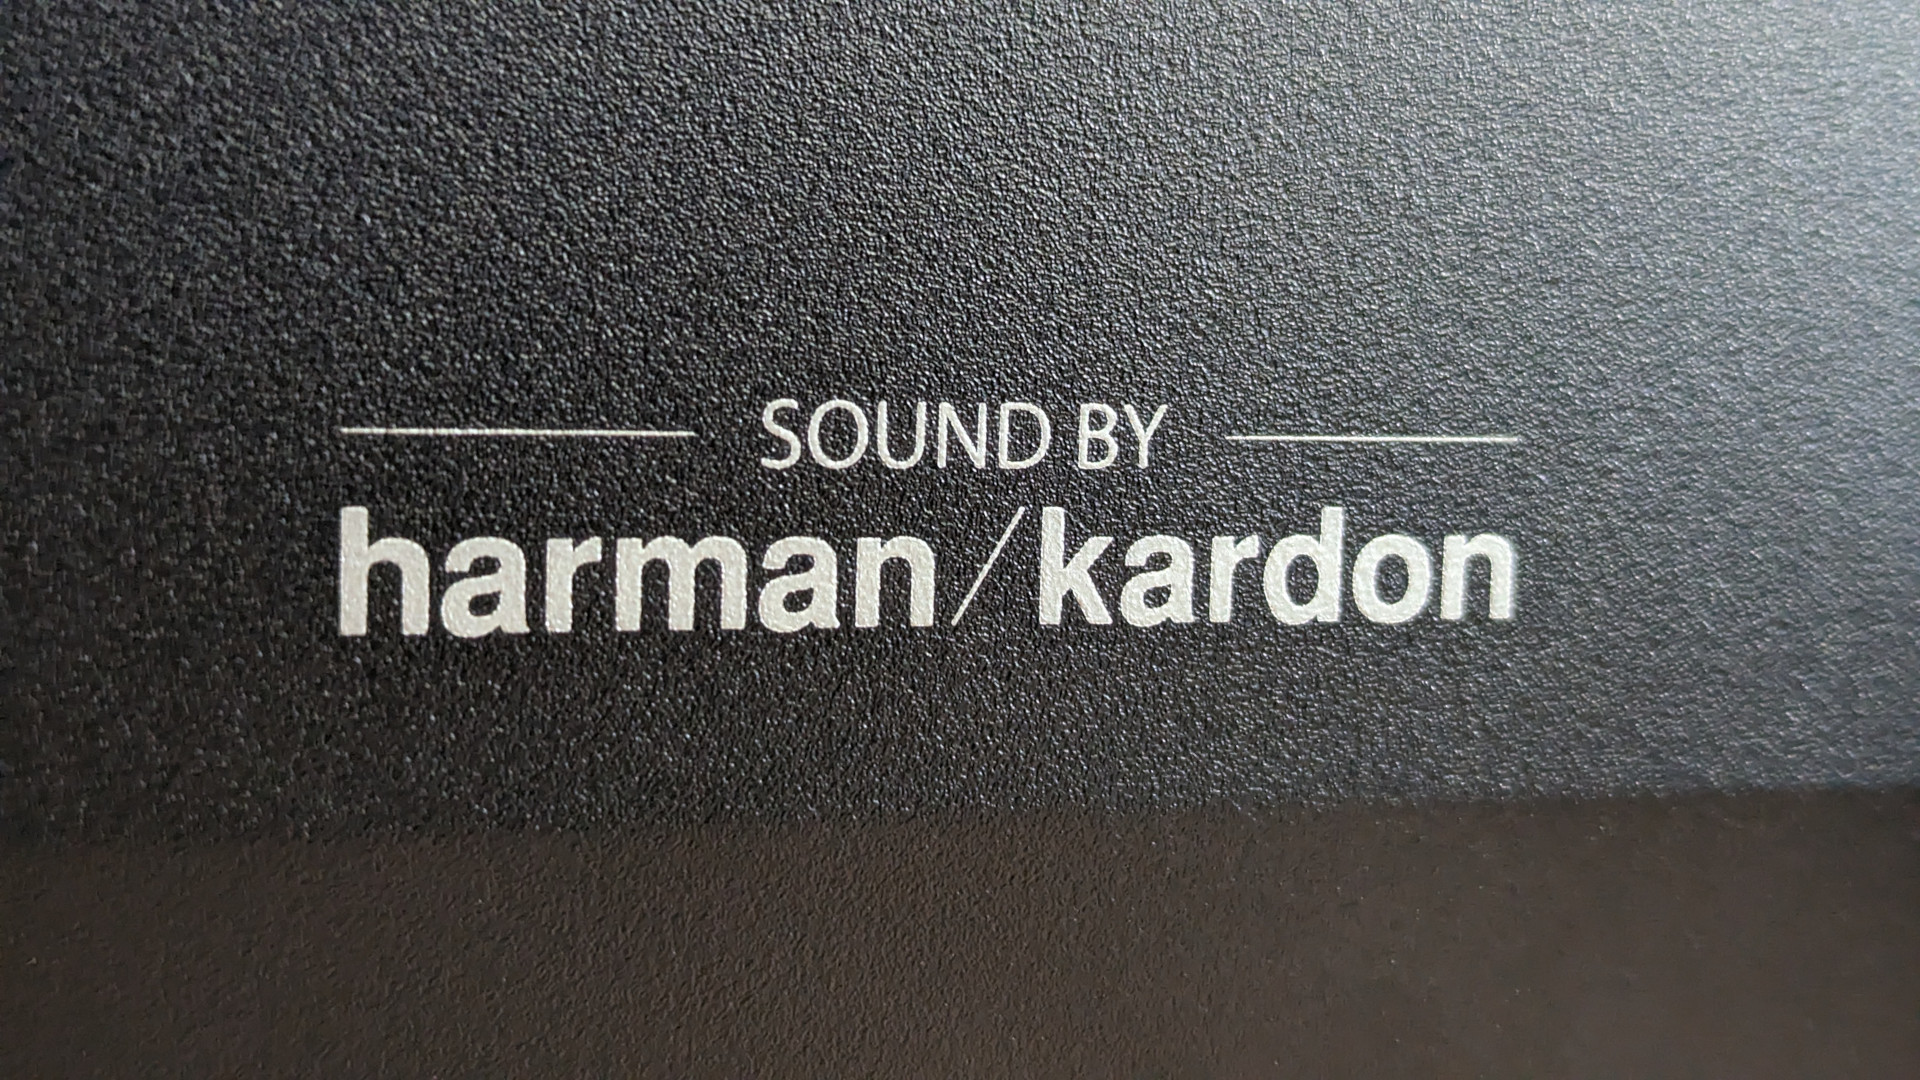 A close up of the rear of the Asus ROG Swift PG48UQ, in which the logo for harman/kardon can be seen